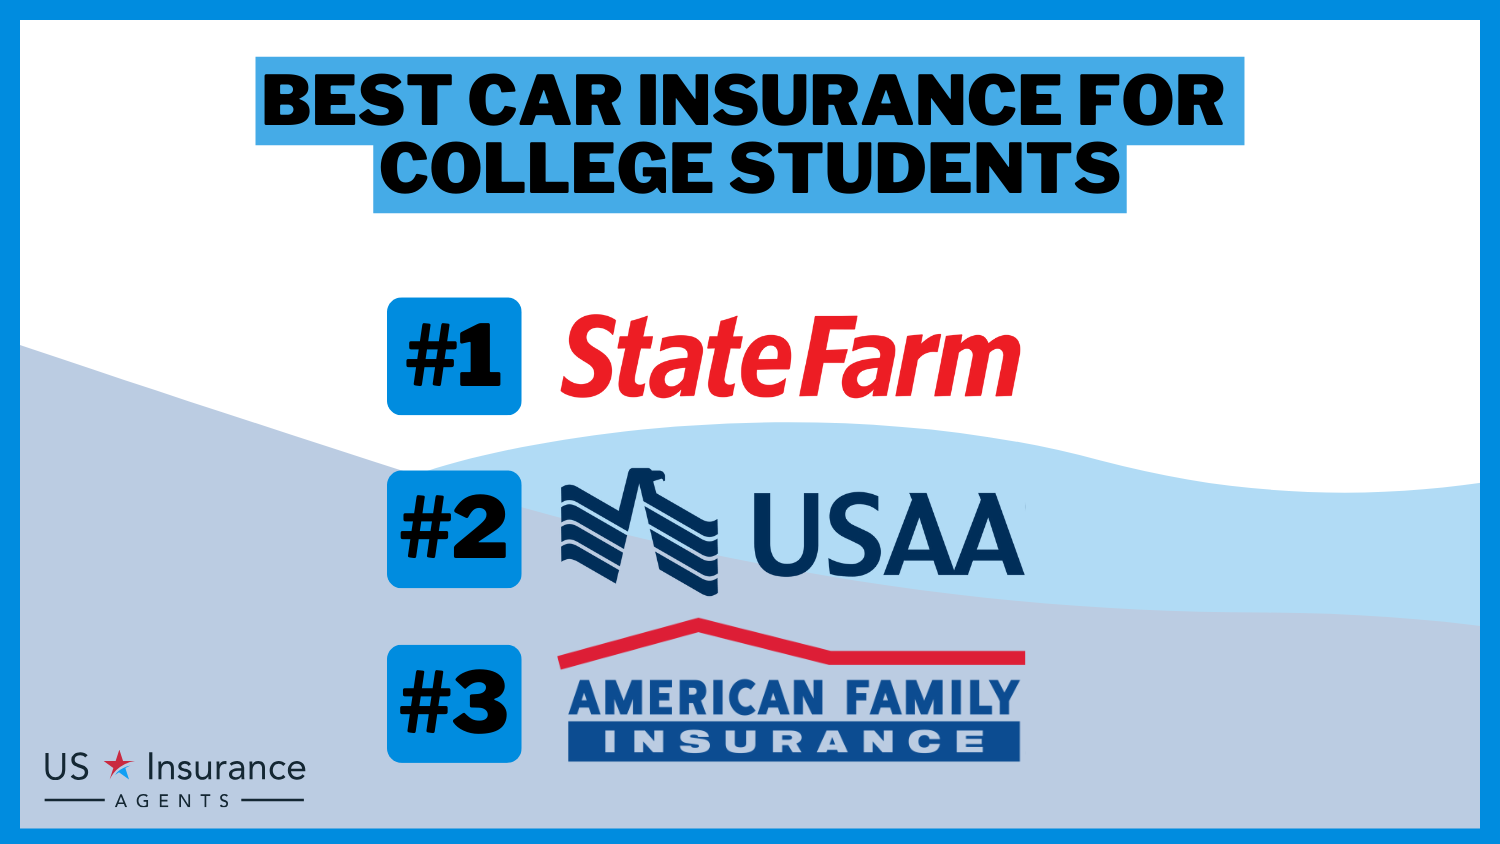 Best Car Insurance for College Students: State Farm, USAA, and American Family